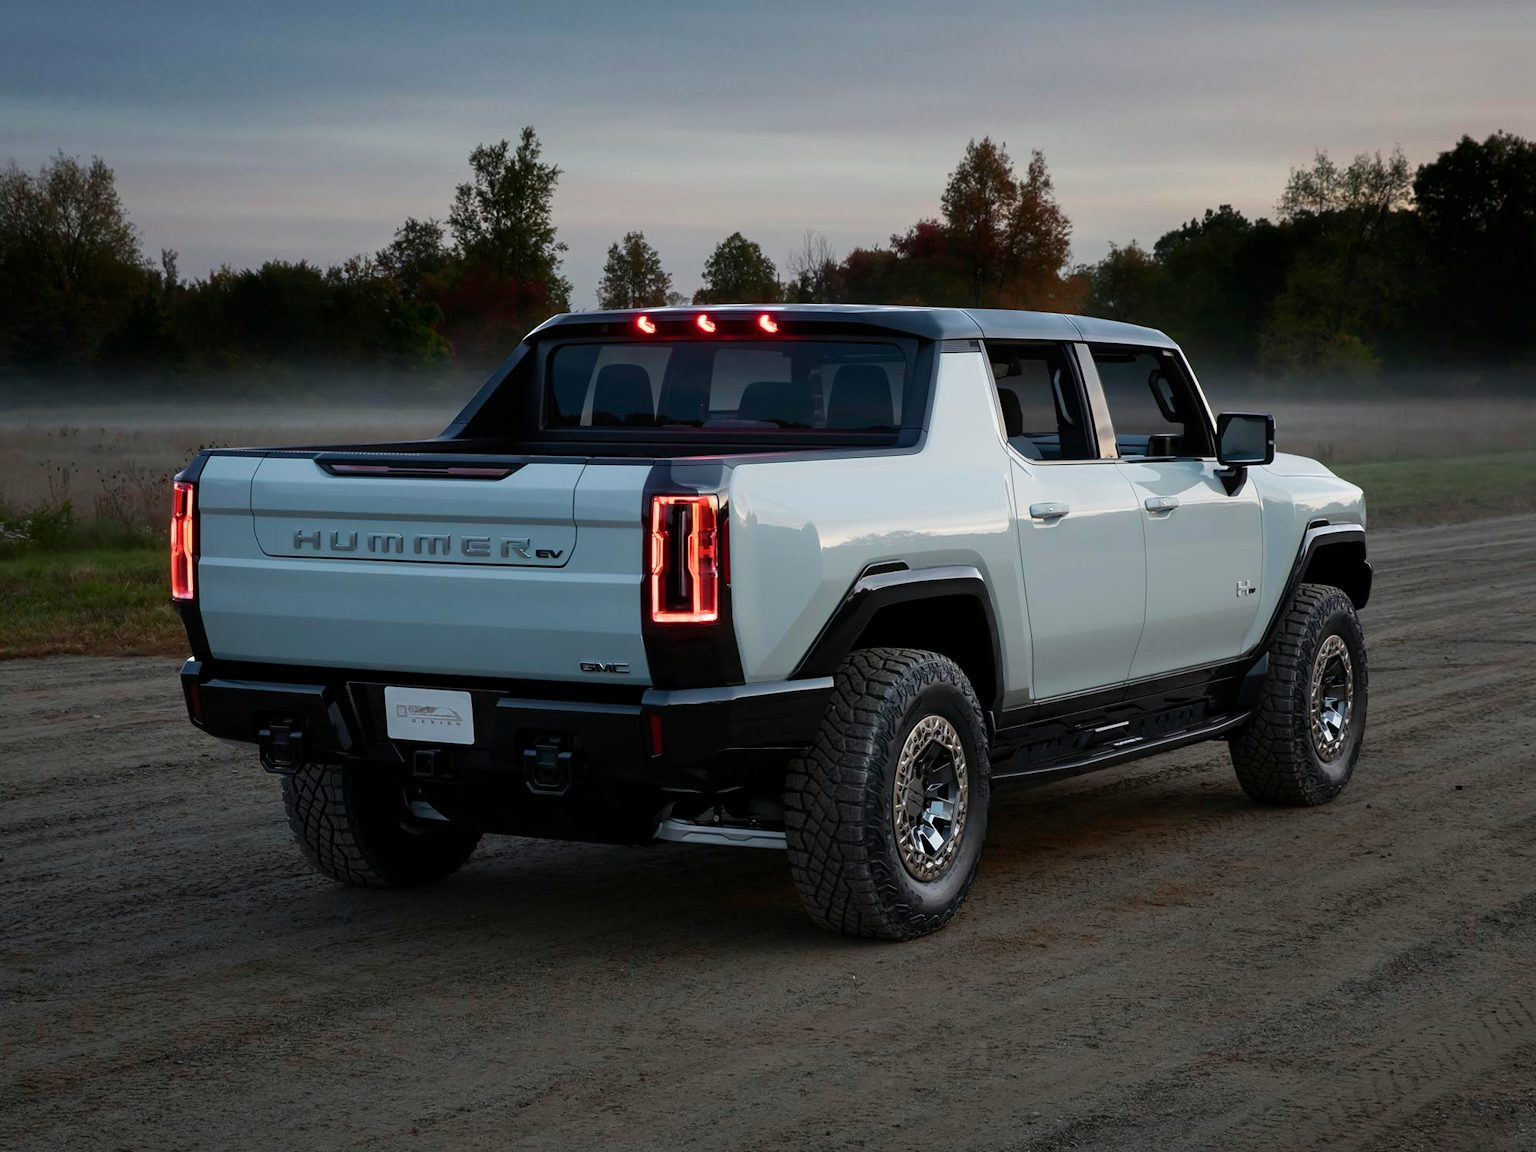 2021 Hummer EV 1000hp electric truck revealed price, specs and release